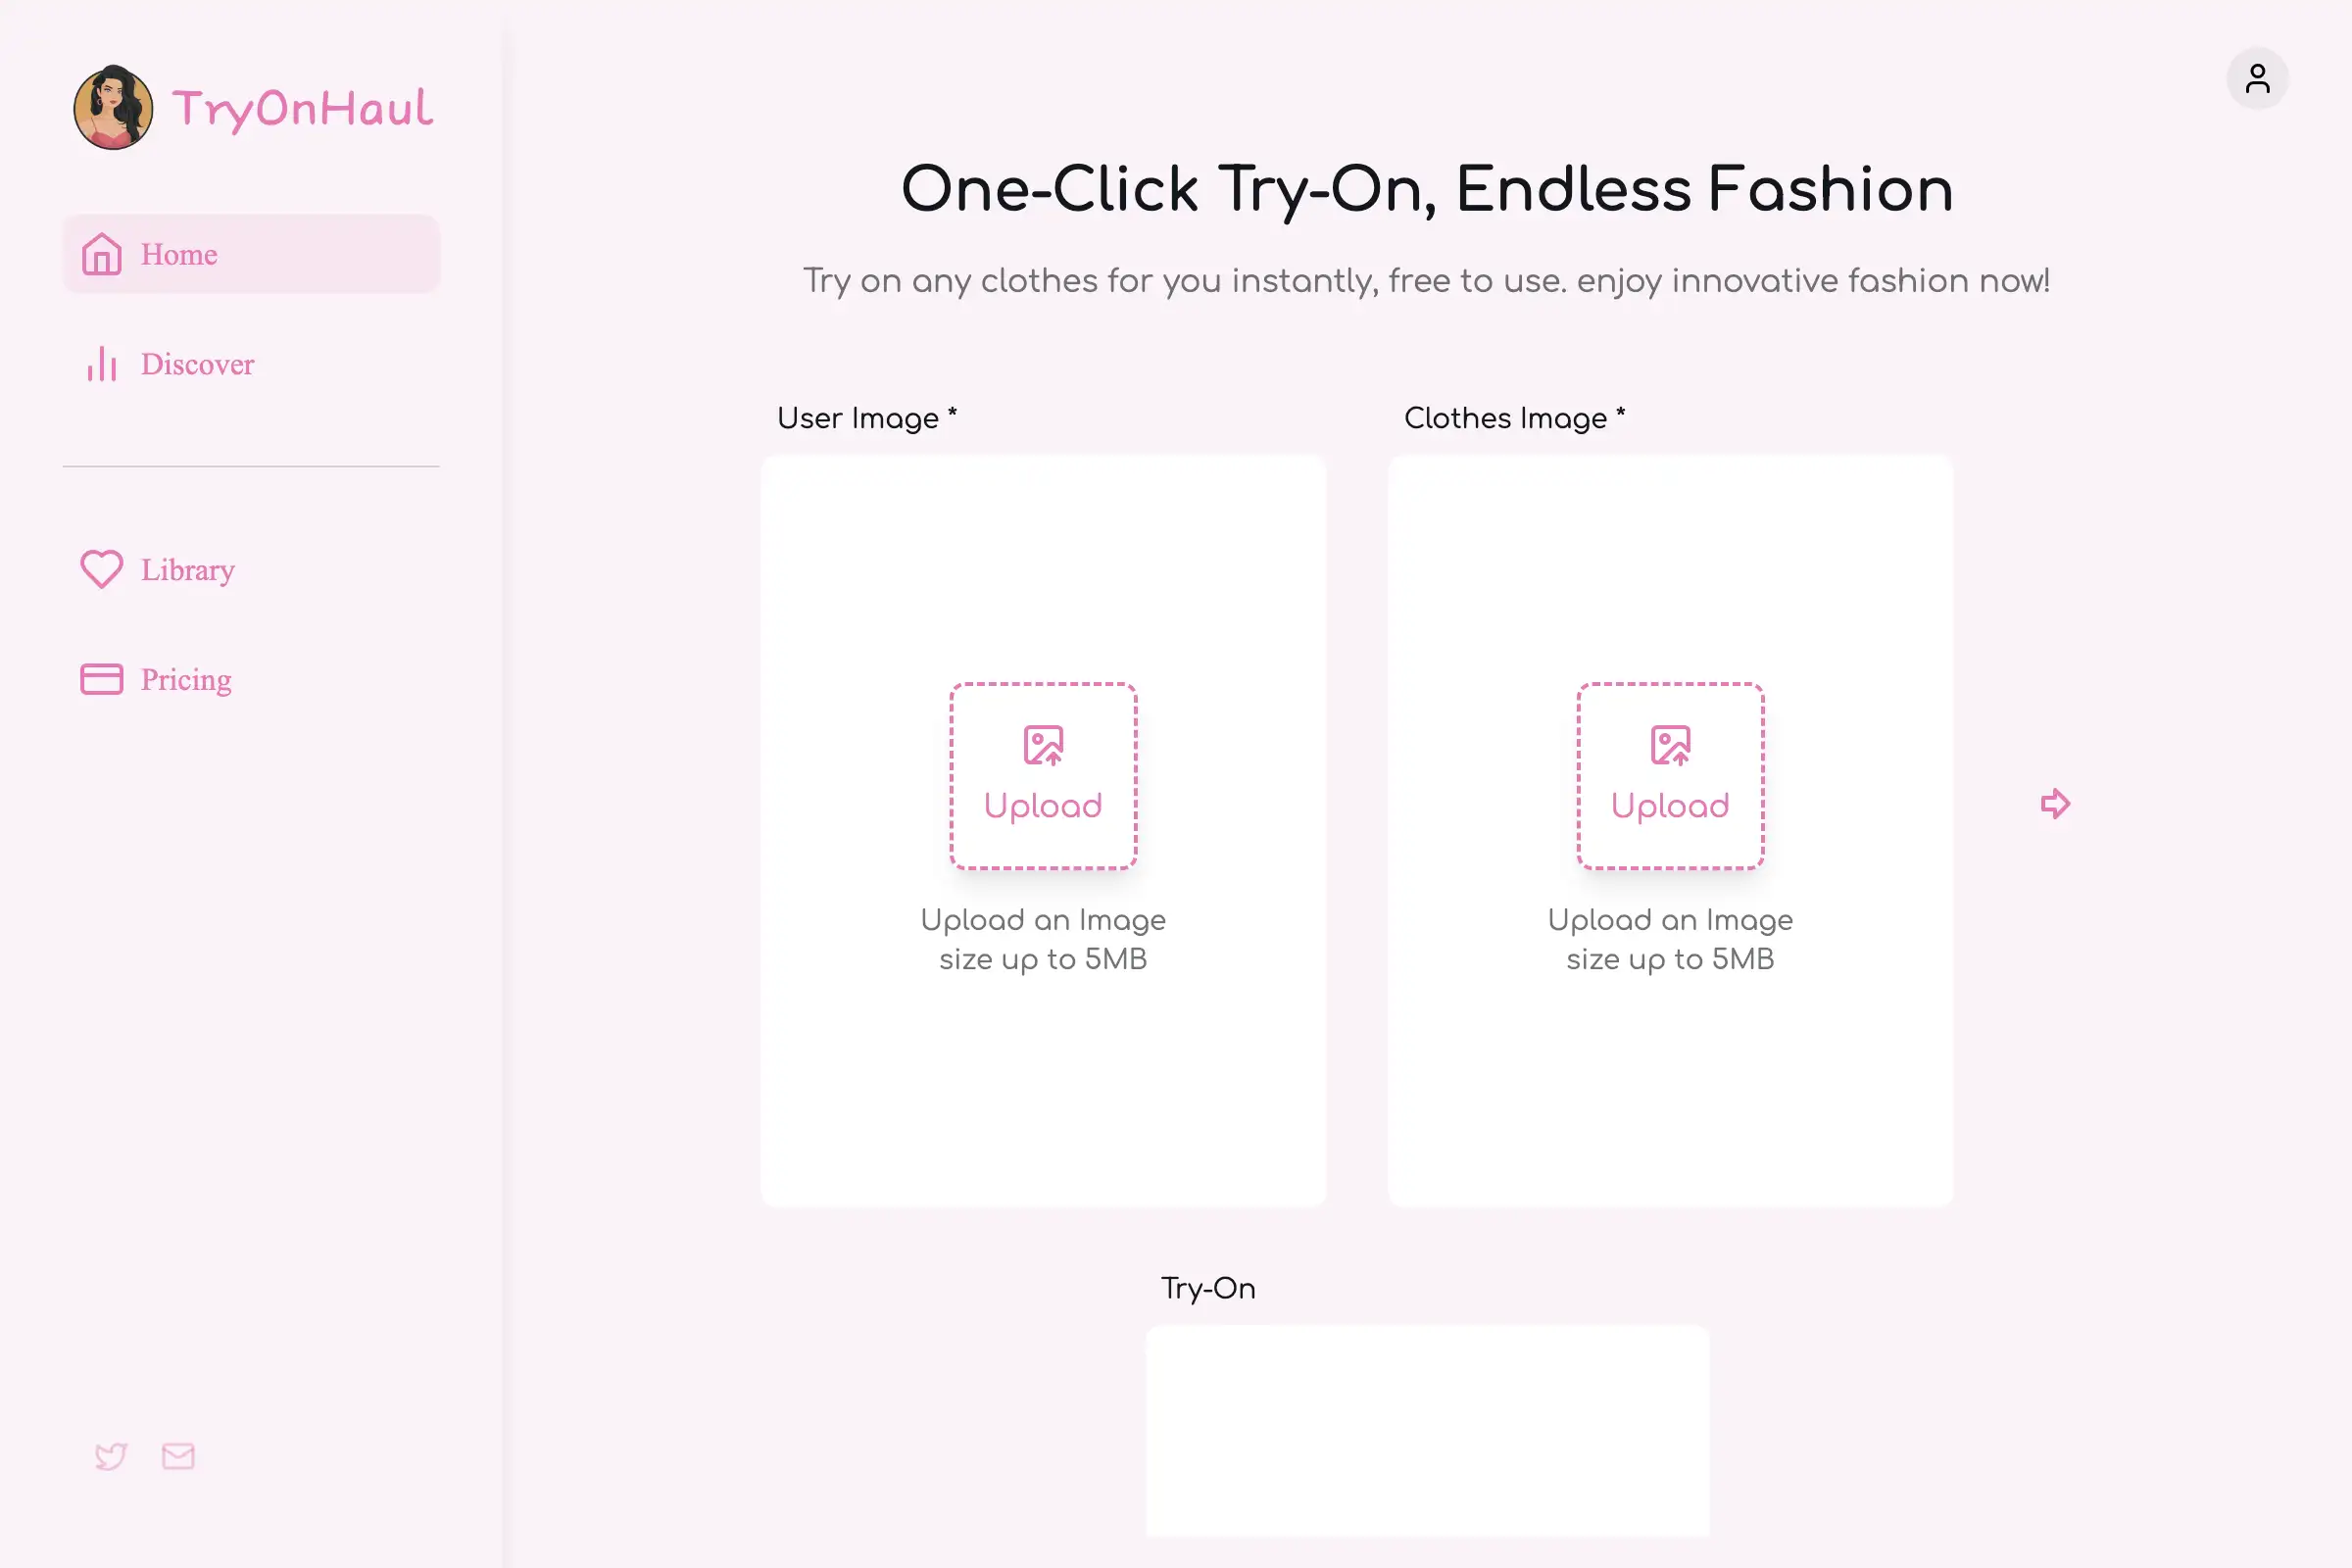 TryOnHaul.app - One-Click Try-On, Endless Fashion